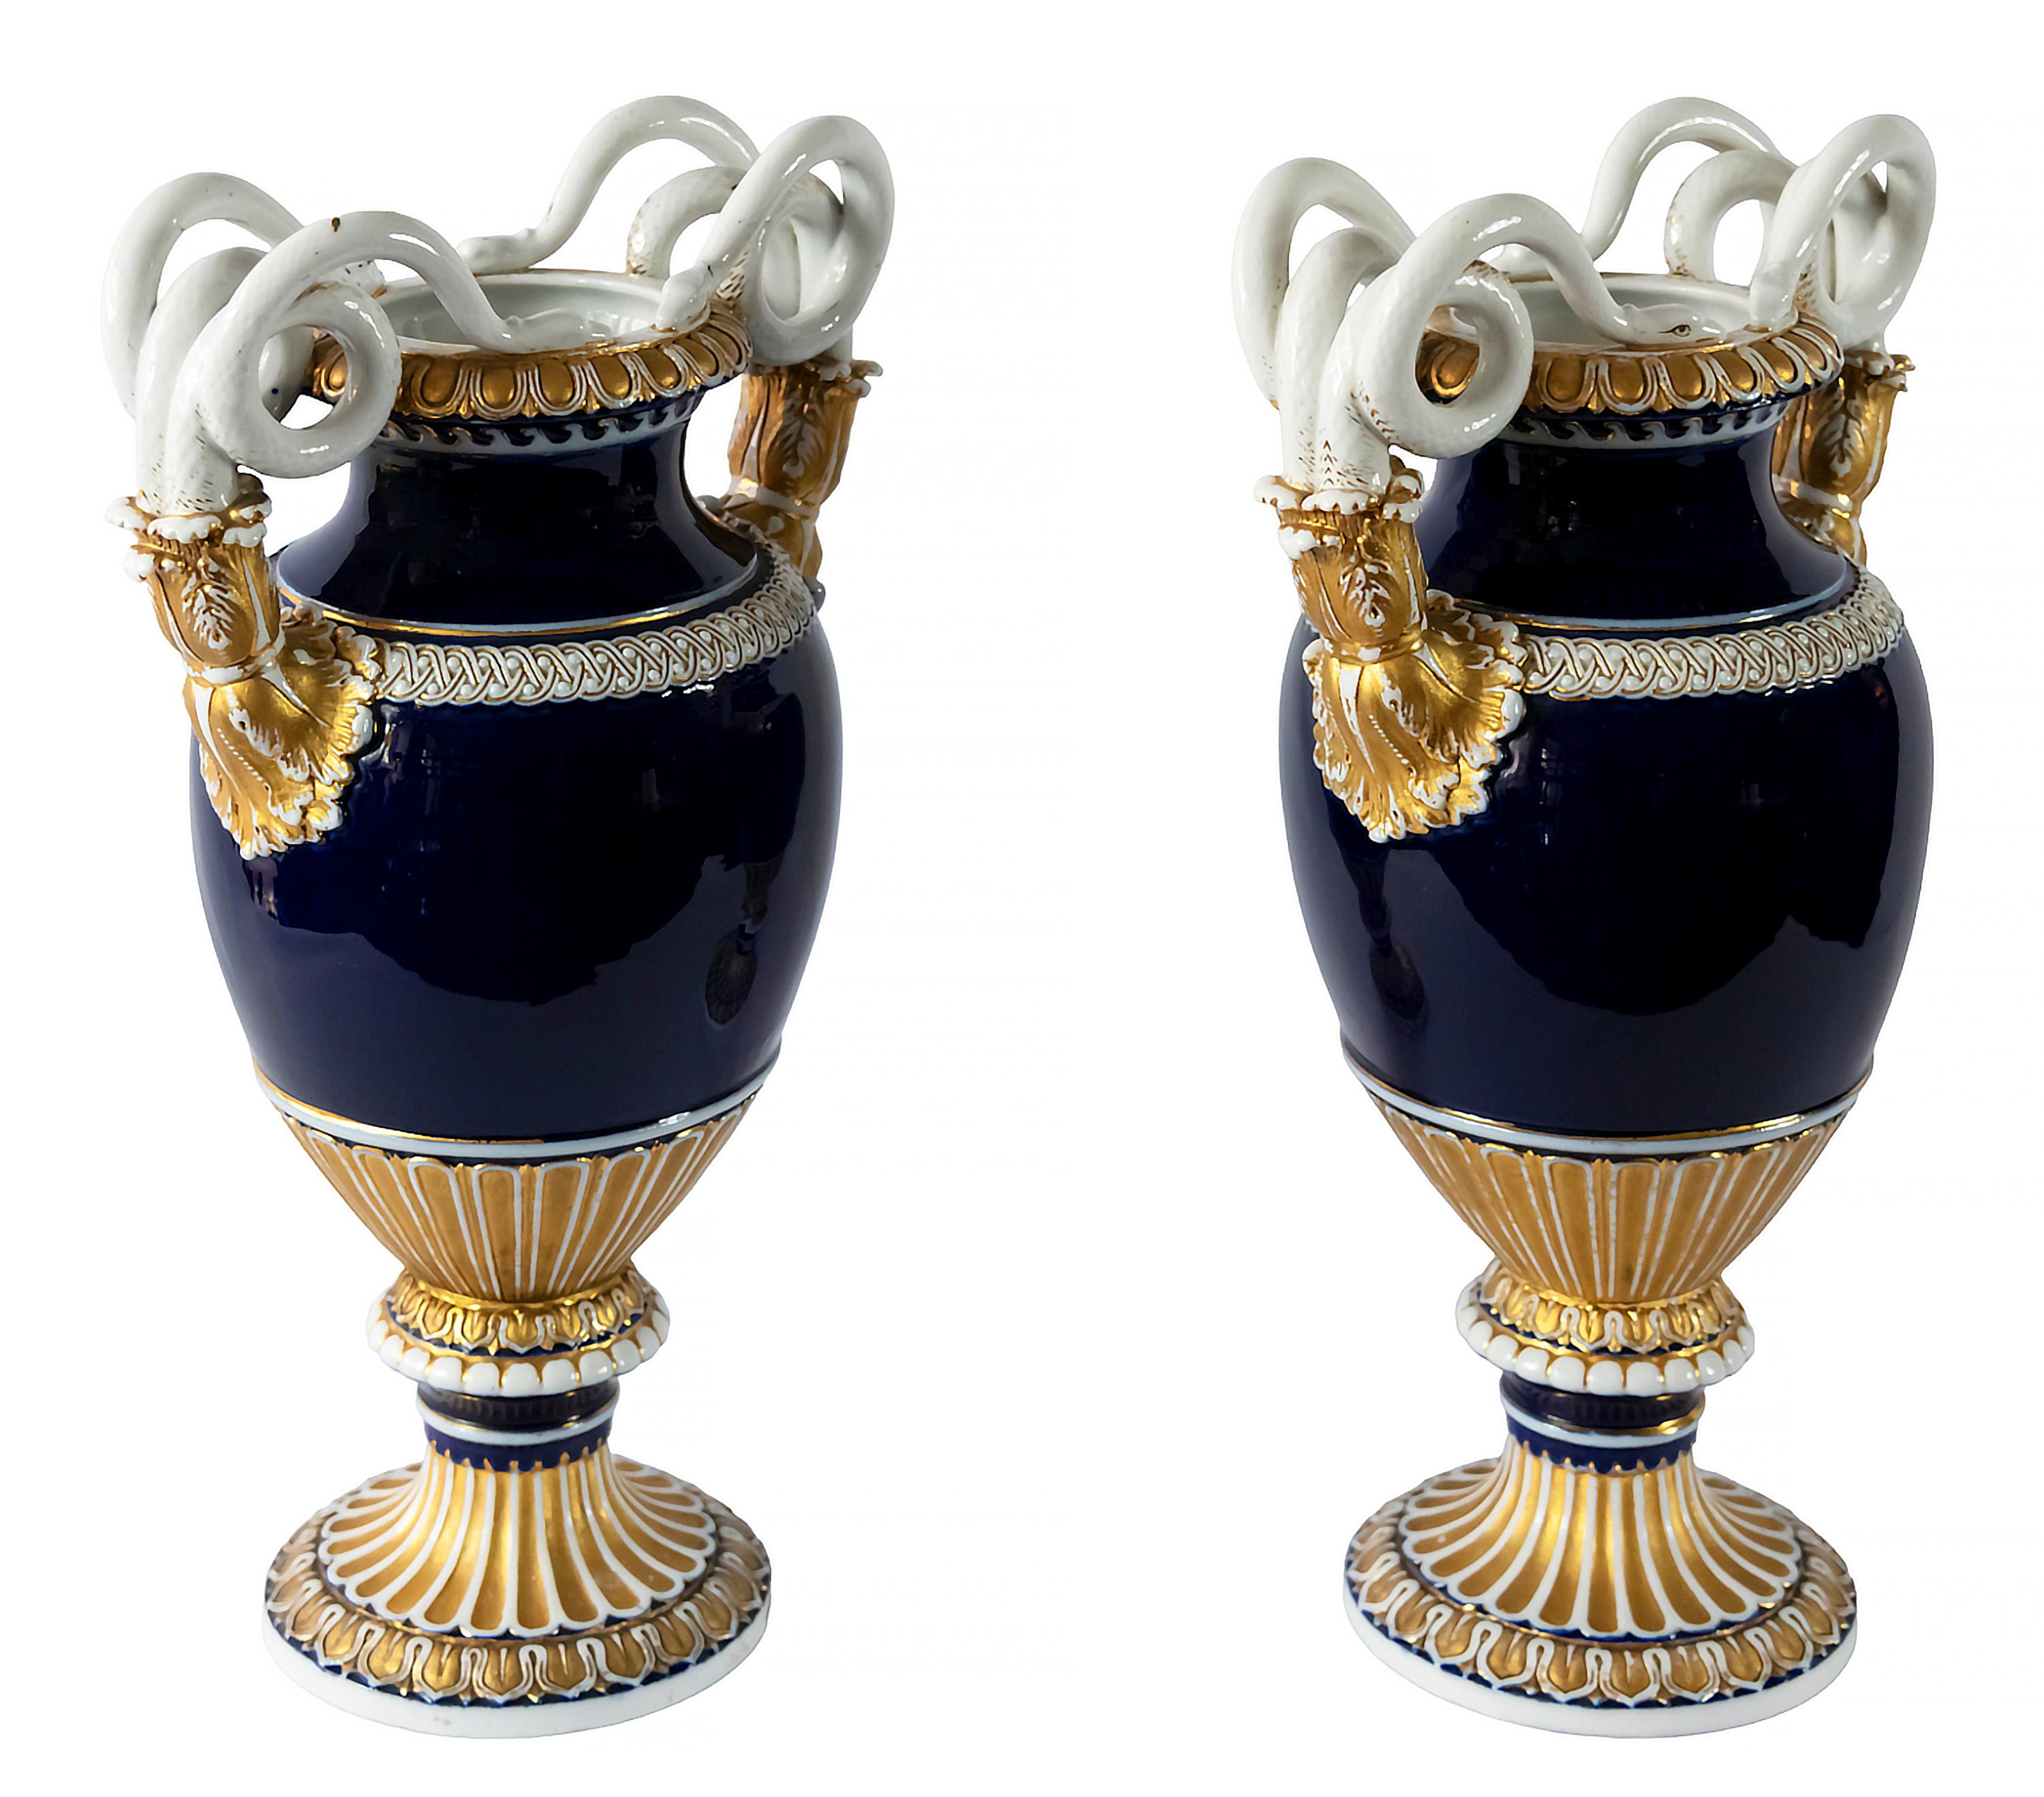 Pair of antique German Meissen porcelain vases designed by August Leuteritz, decorated with snake handles, cobalt blue color and gold.
Meissen mark on the base (1860-1924).
Very good antique condition.